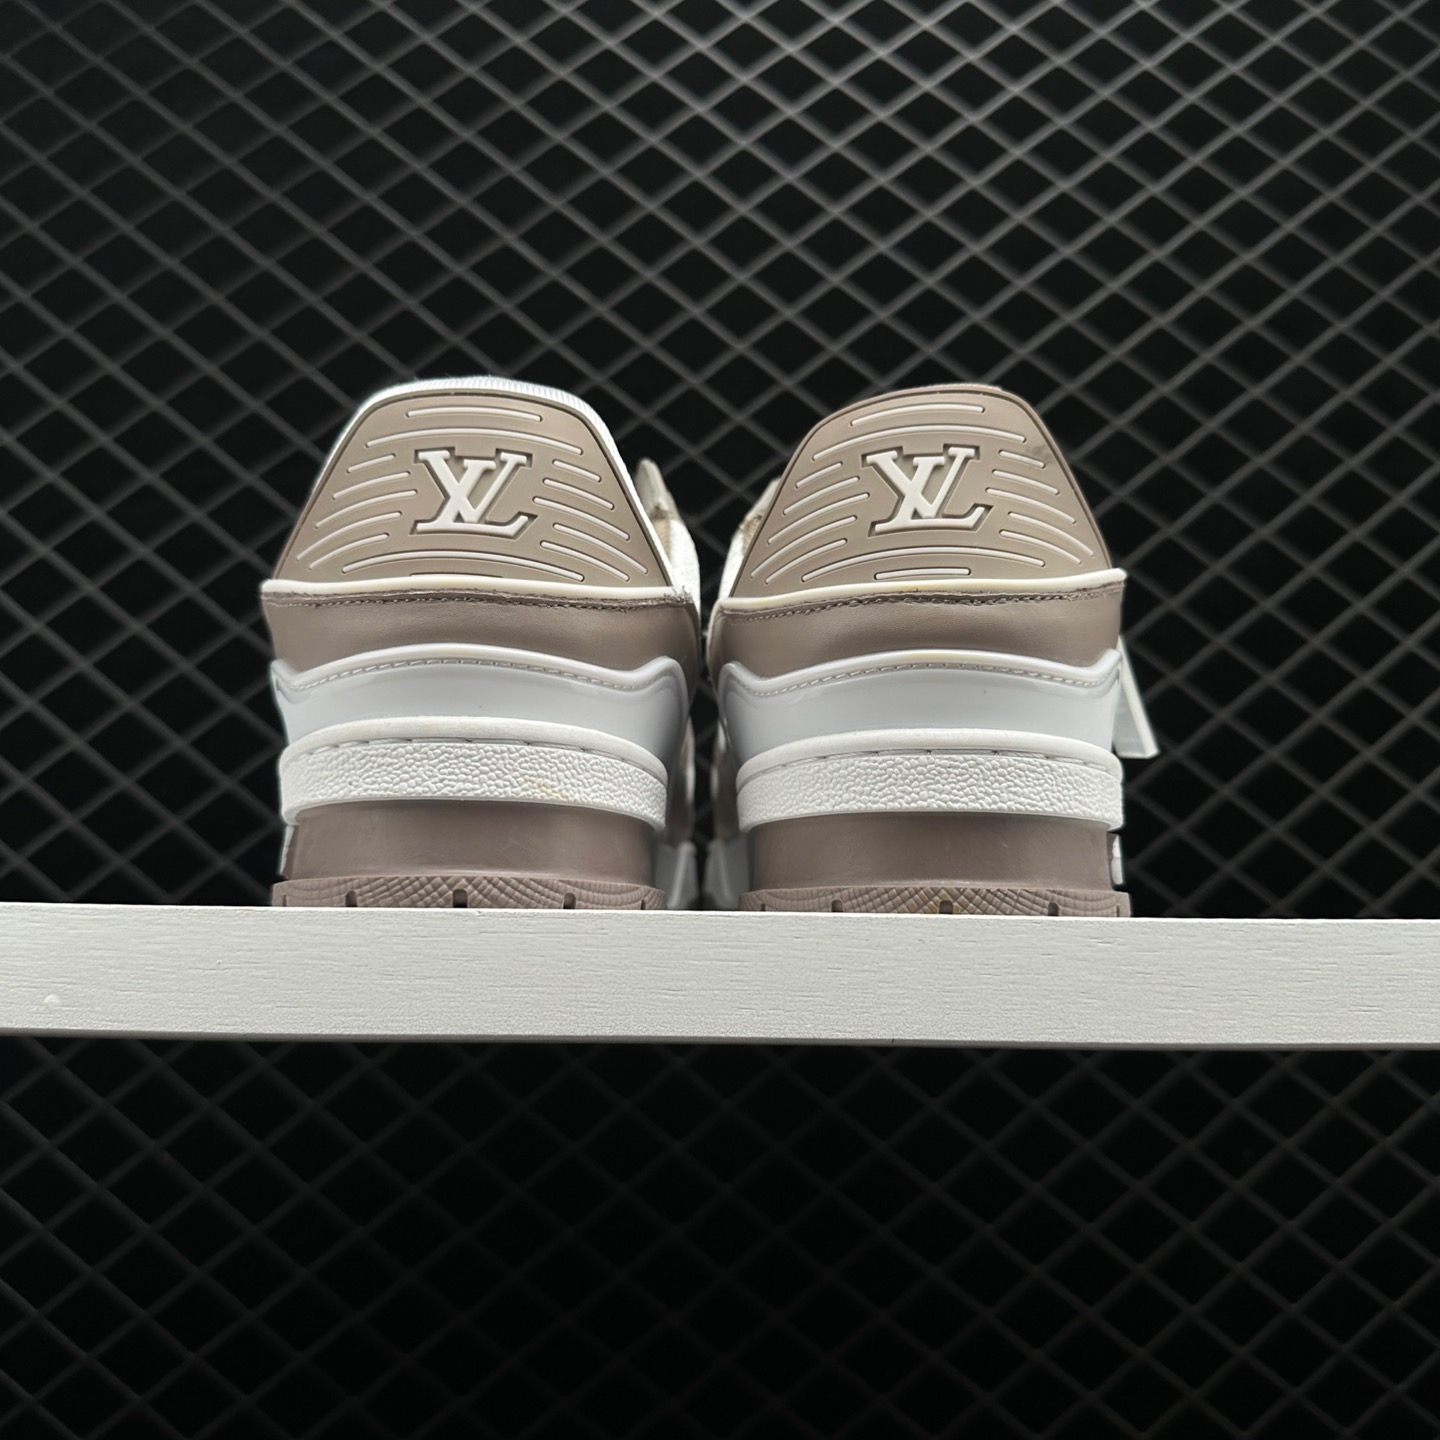 Louis Vuitton Trainer Sneaker Grey White - Stylish and High-Quality Footwear